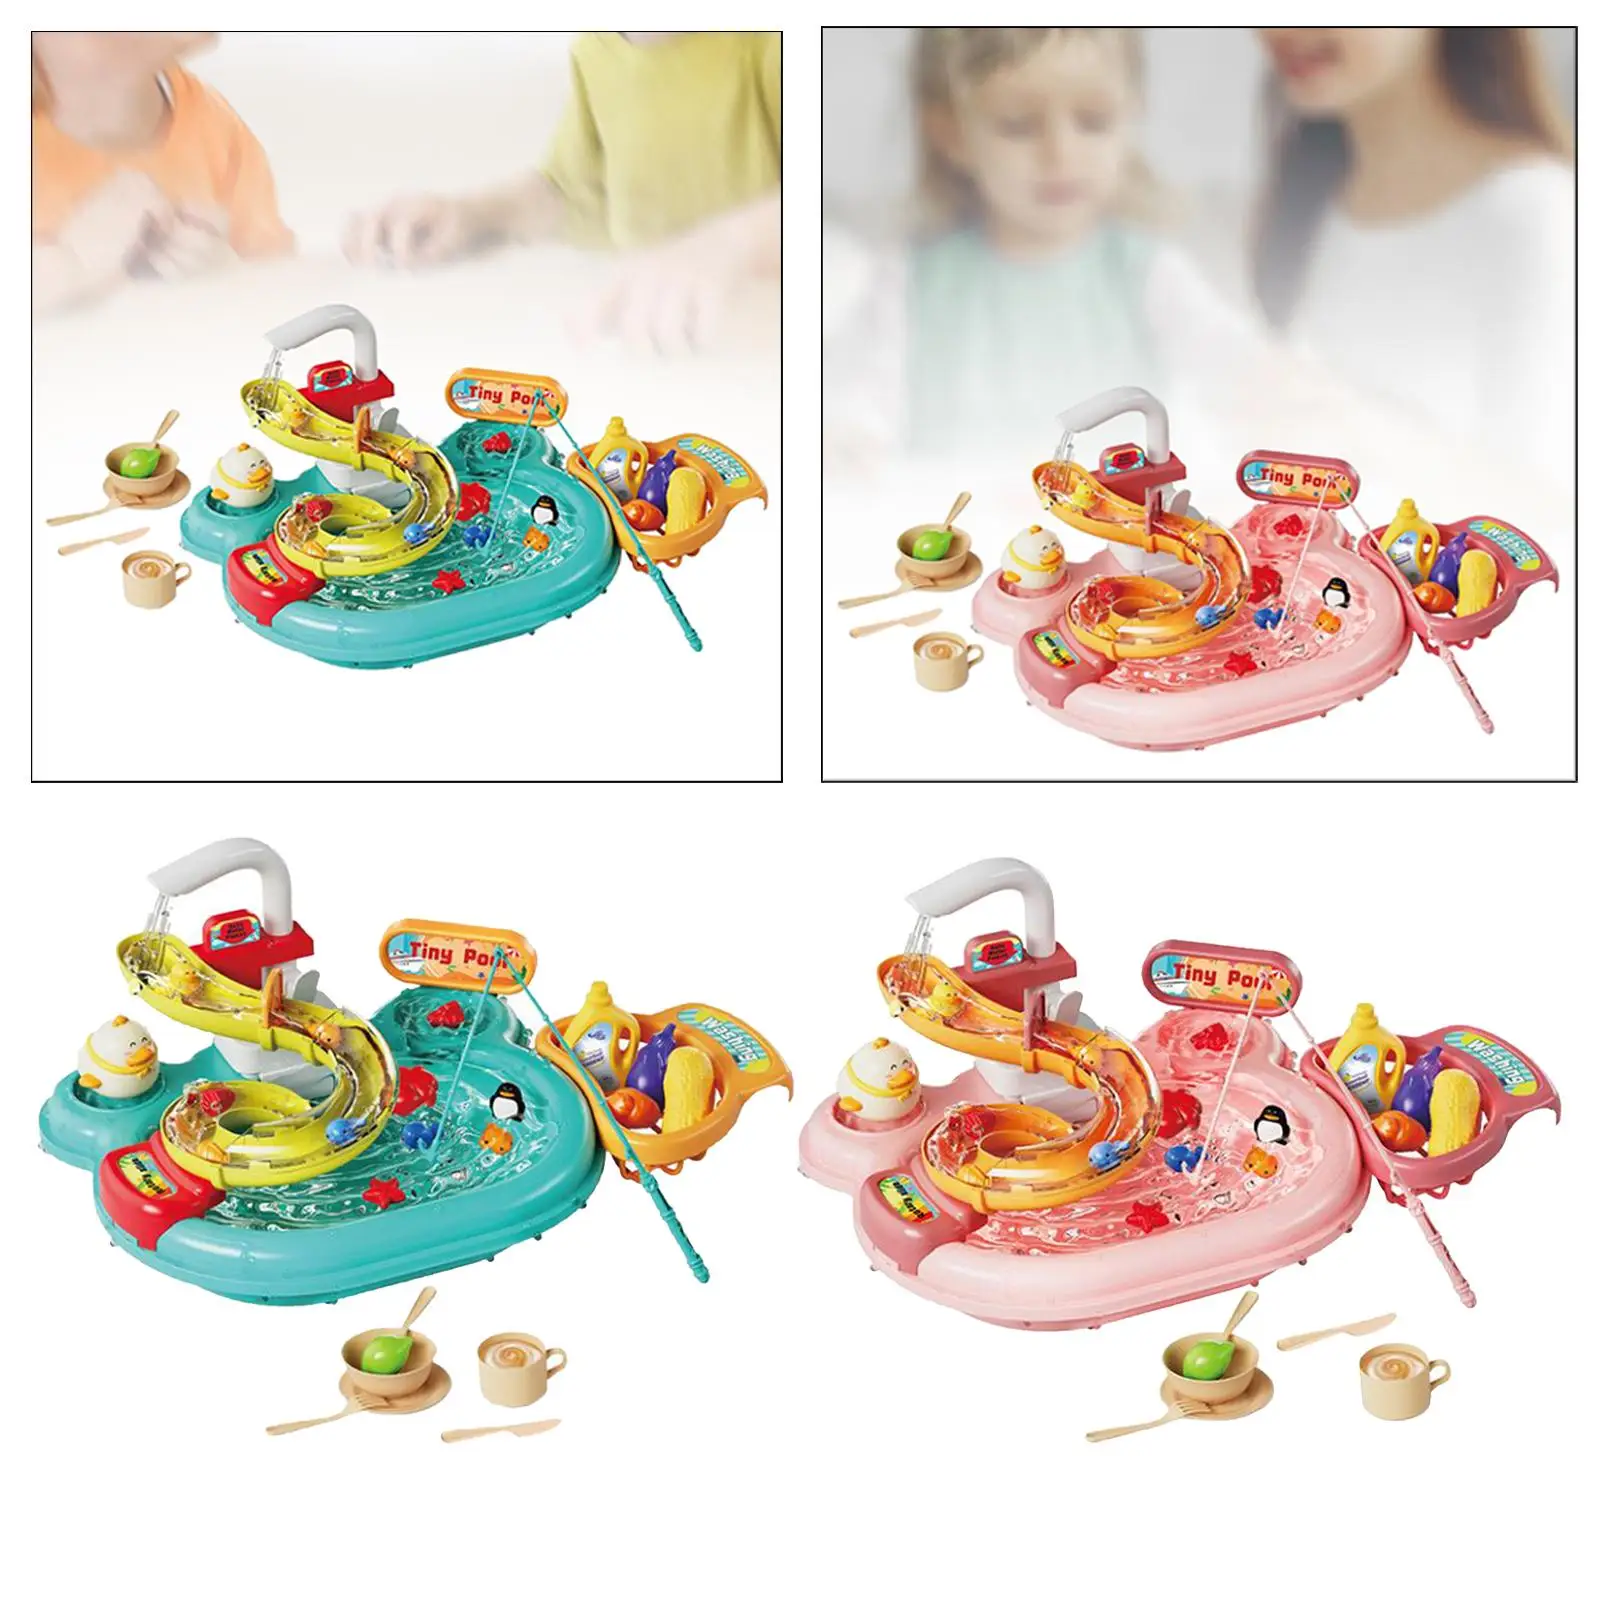 Kitchen Sink Toy House Pretend Role Play Toys Automatic Water Cycle System Playset for Play House Kitchen Role Play